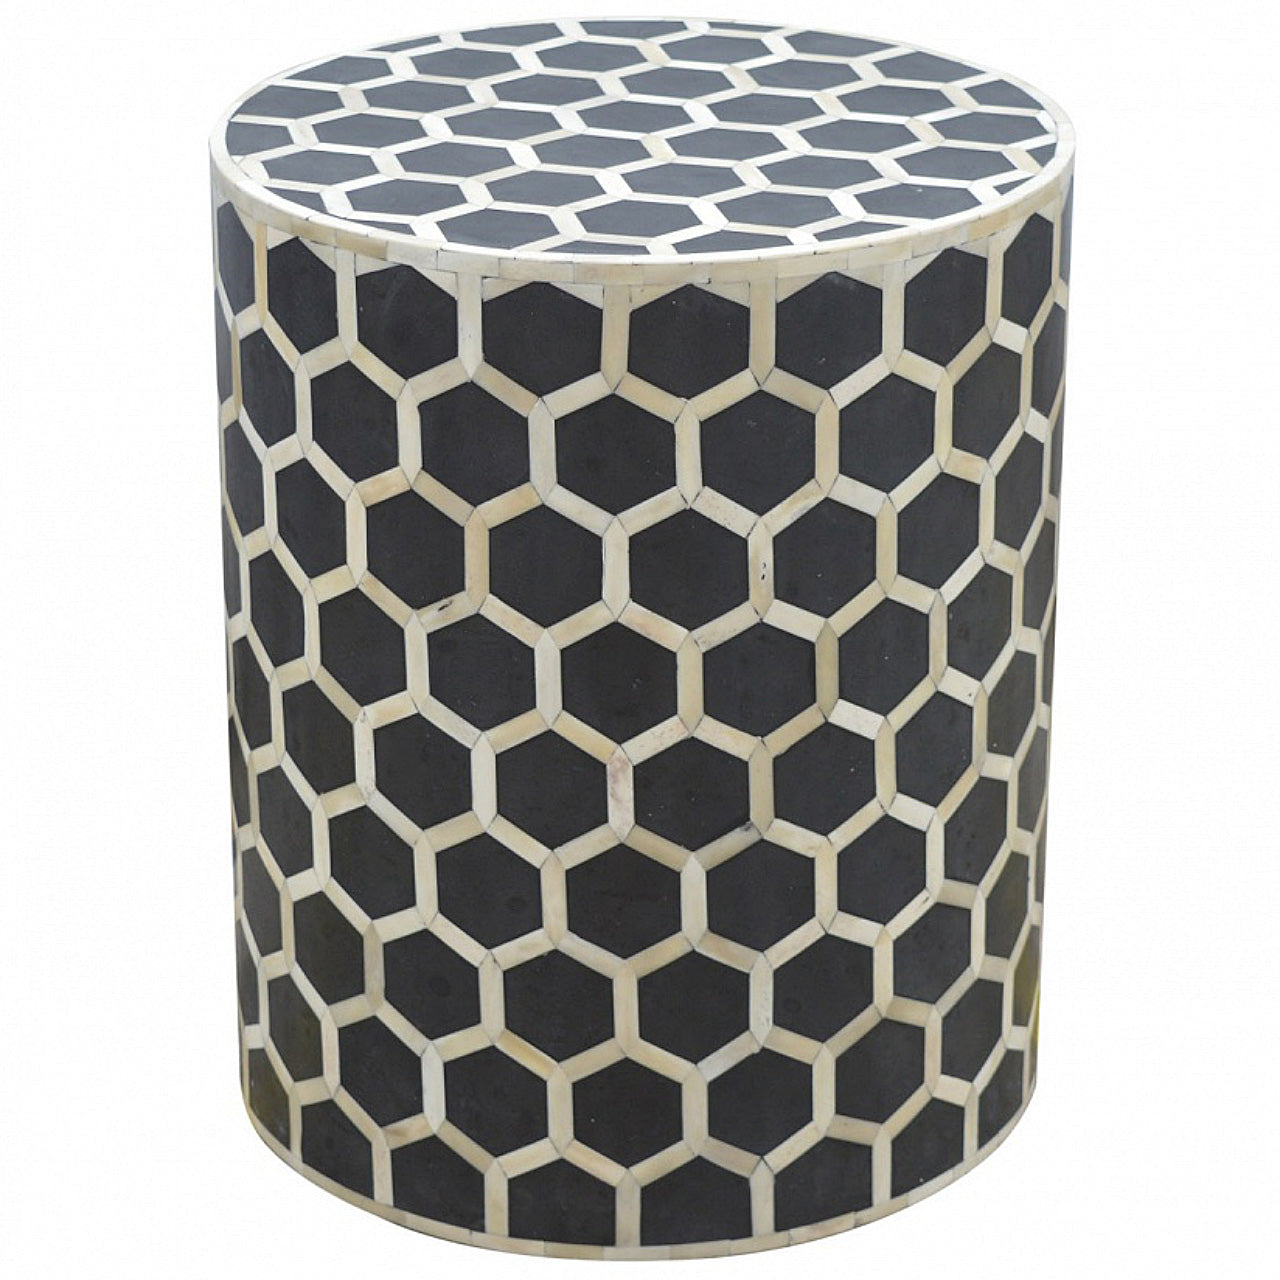 View Cylindrical Bone Inlay Footstool information